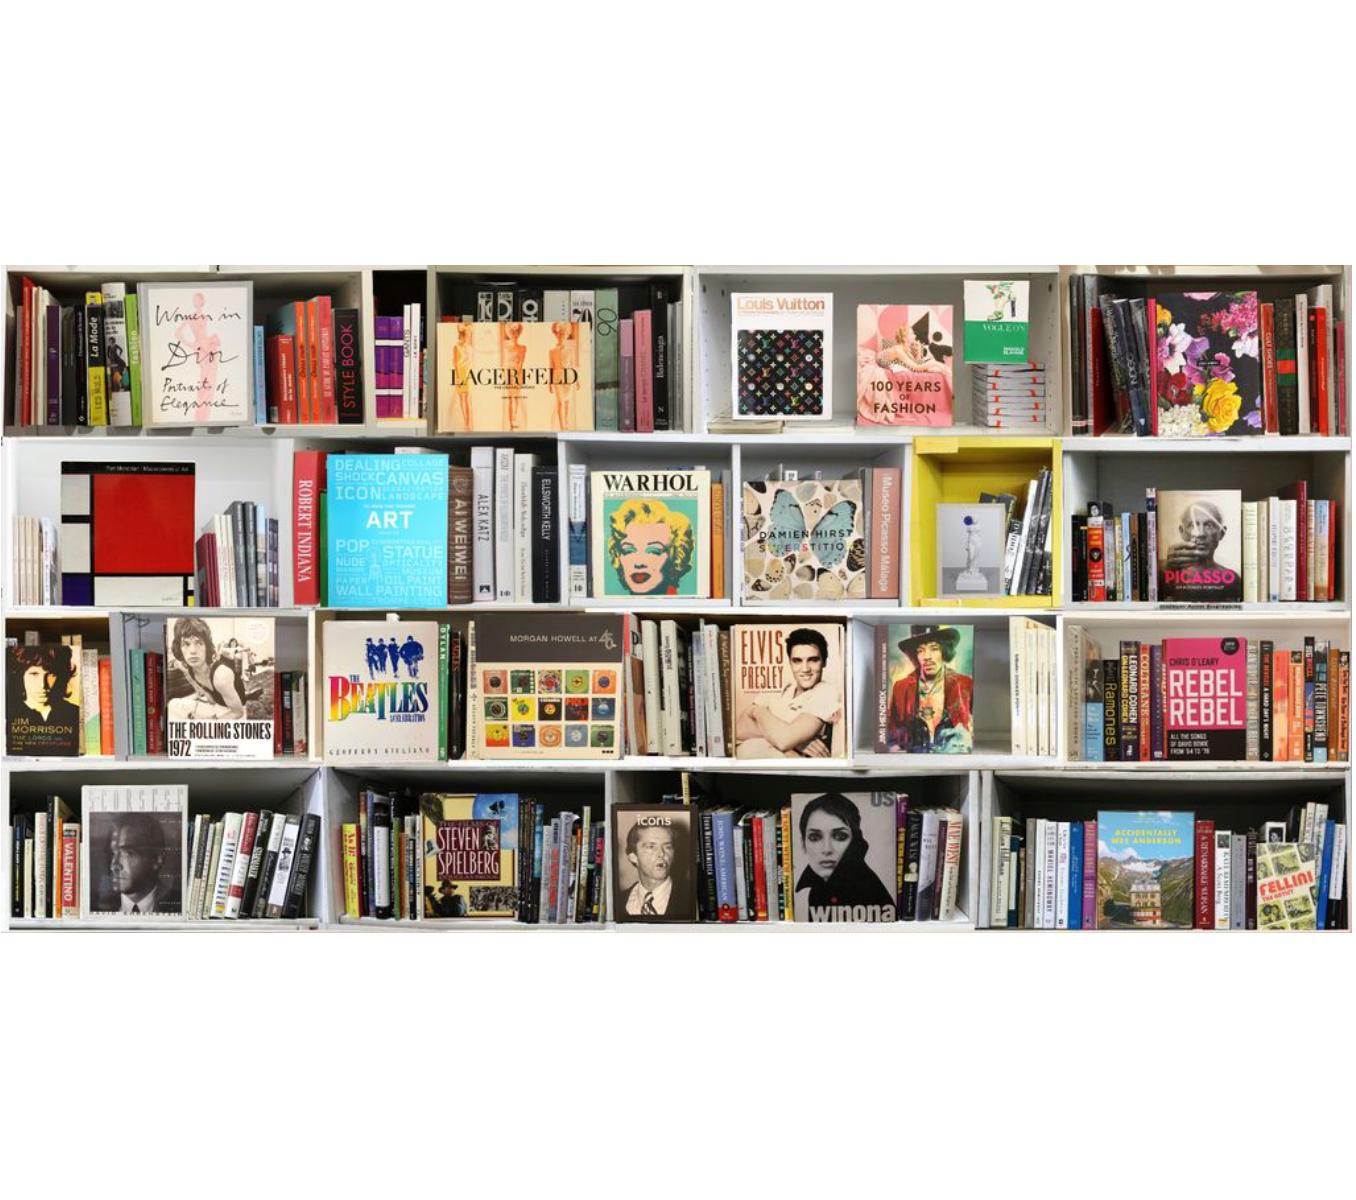 RAFF - AC (ed# 1/5) Art&Music BookScape by Max Steven Grossman 

In his photographic series of "Bookscapes" the assembled libraries only exist in his photographs.  From photos of different bookshelves, he reorganizes them into a creative digital